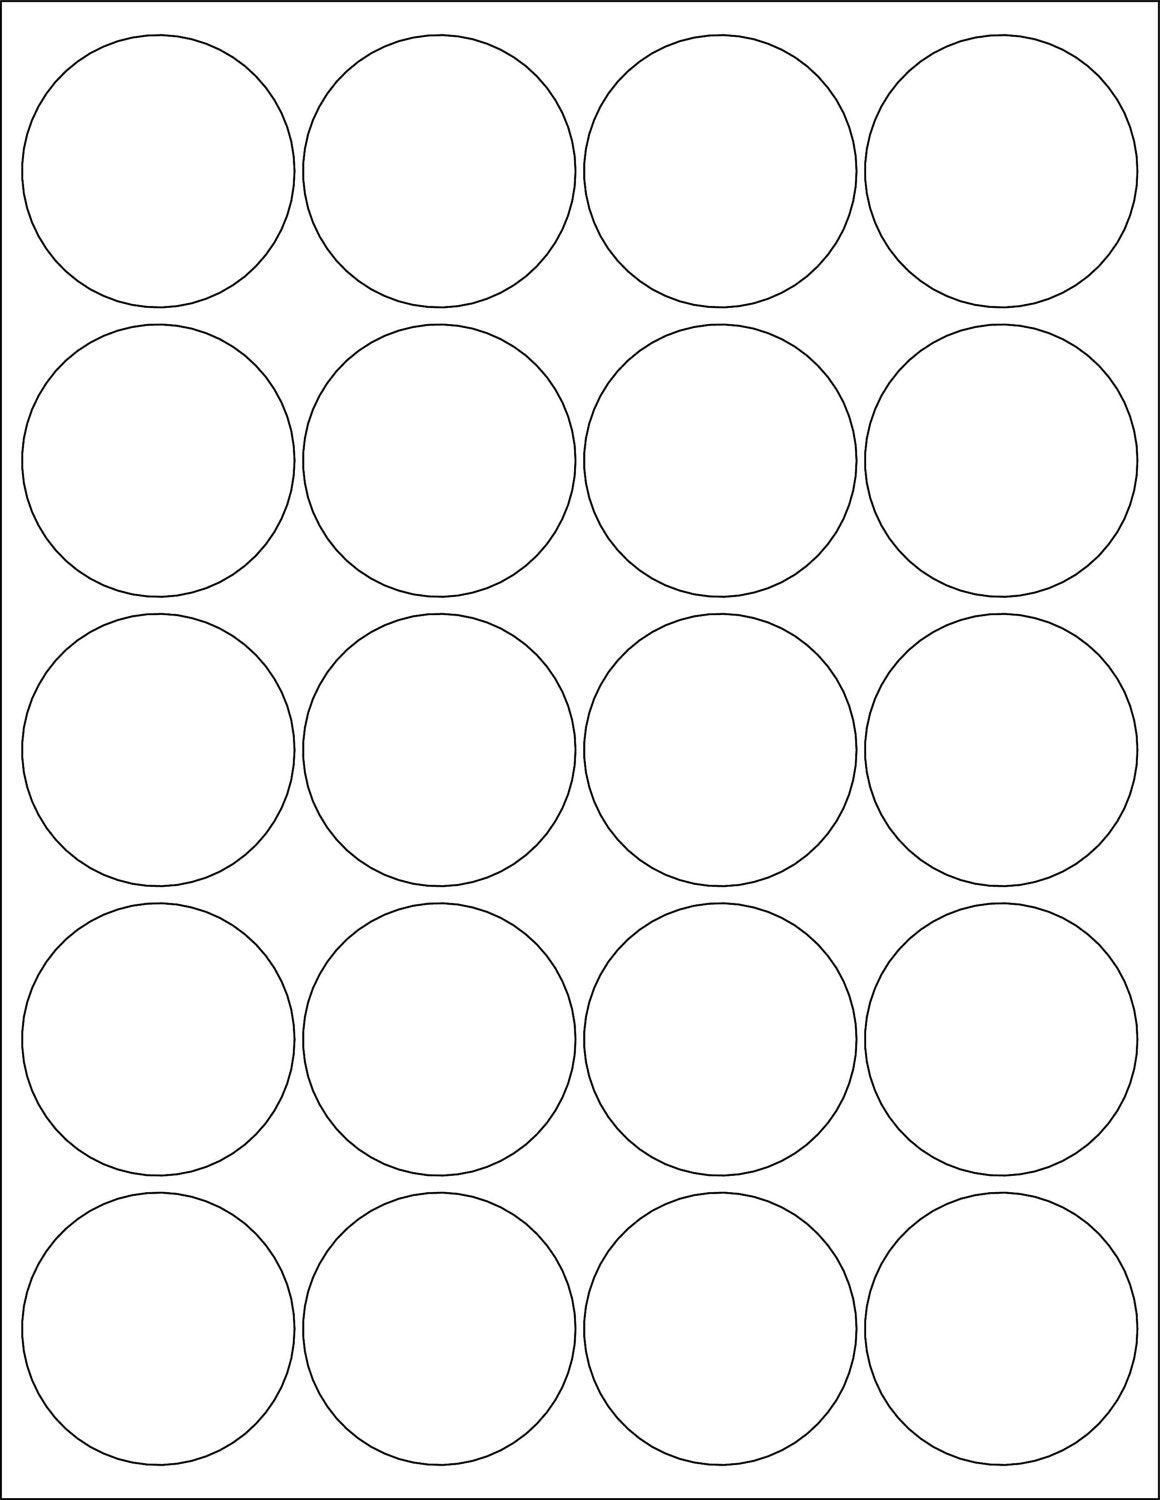 avery-round-label-template-five-facts-about-avery-15-inch-printable